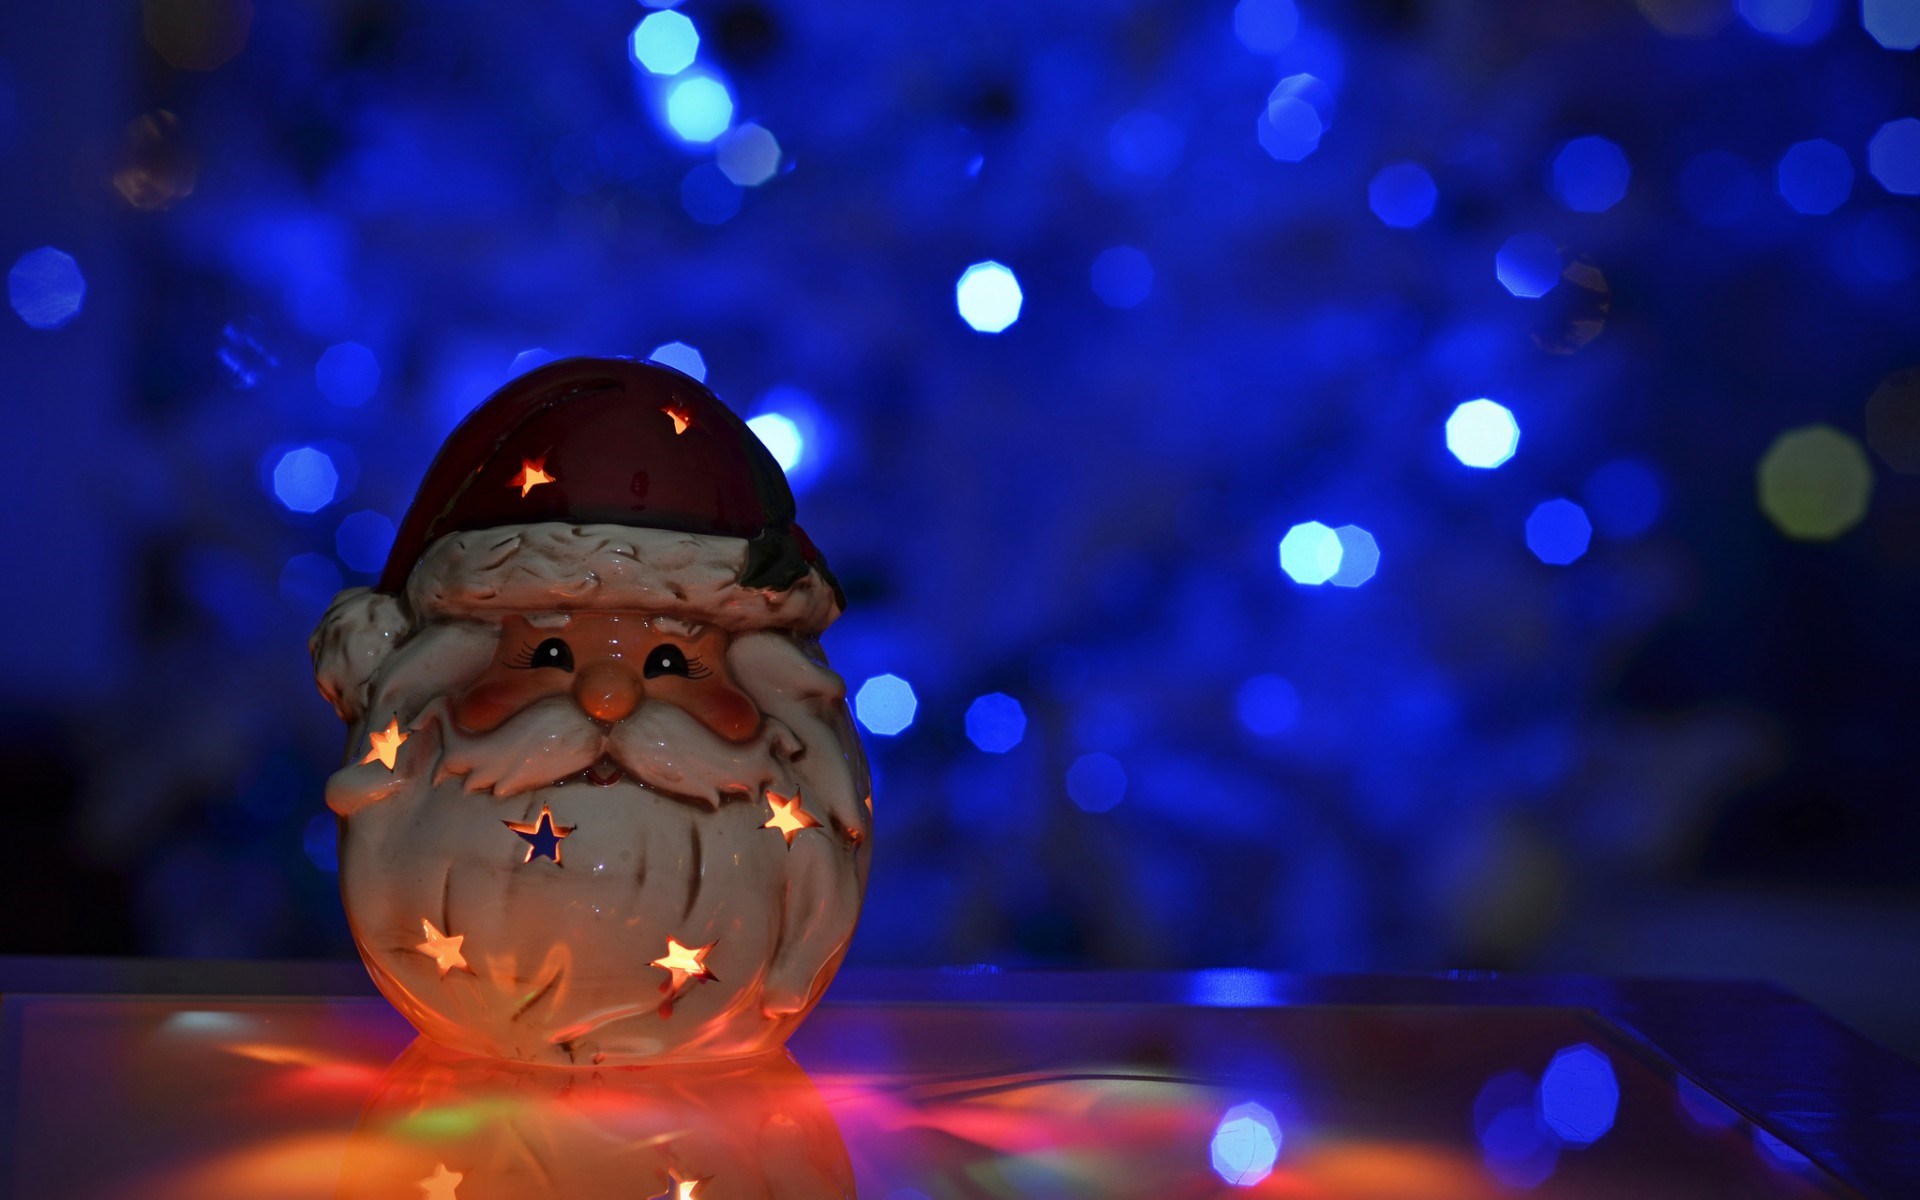 Merry Christmas hd Wallpapers, Images Free Download